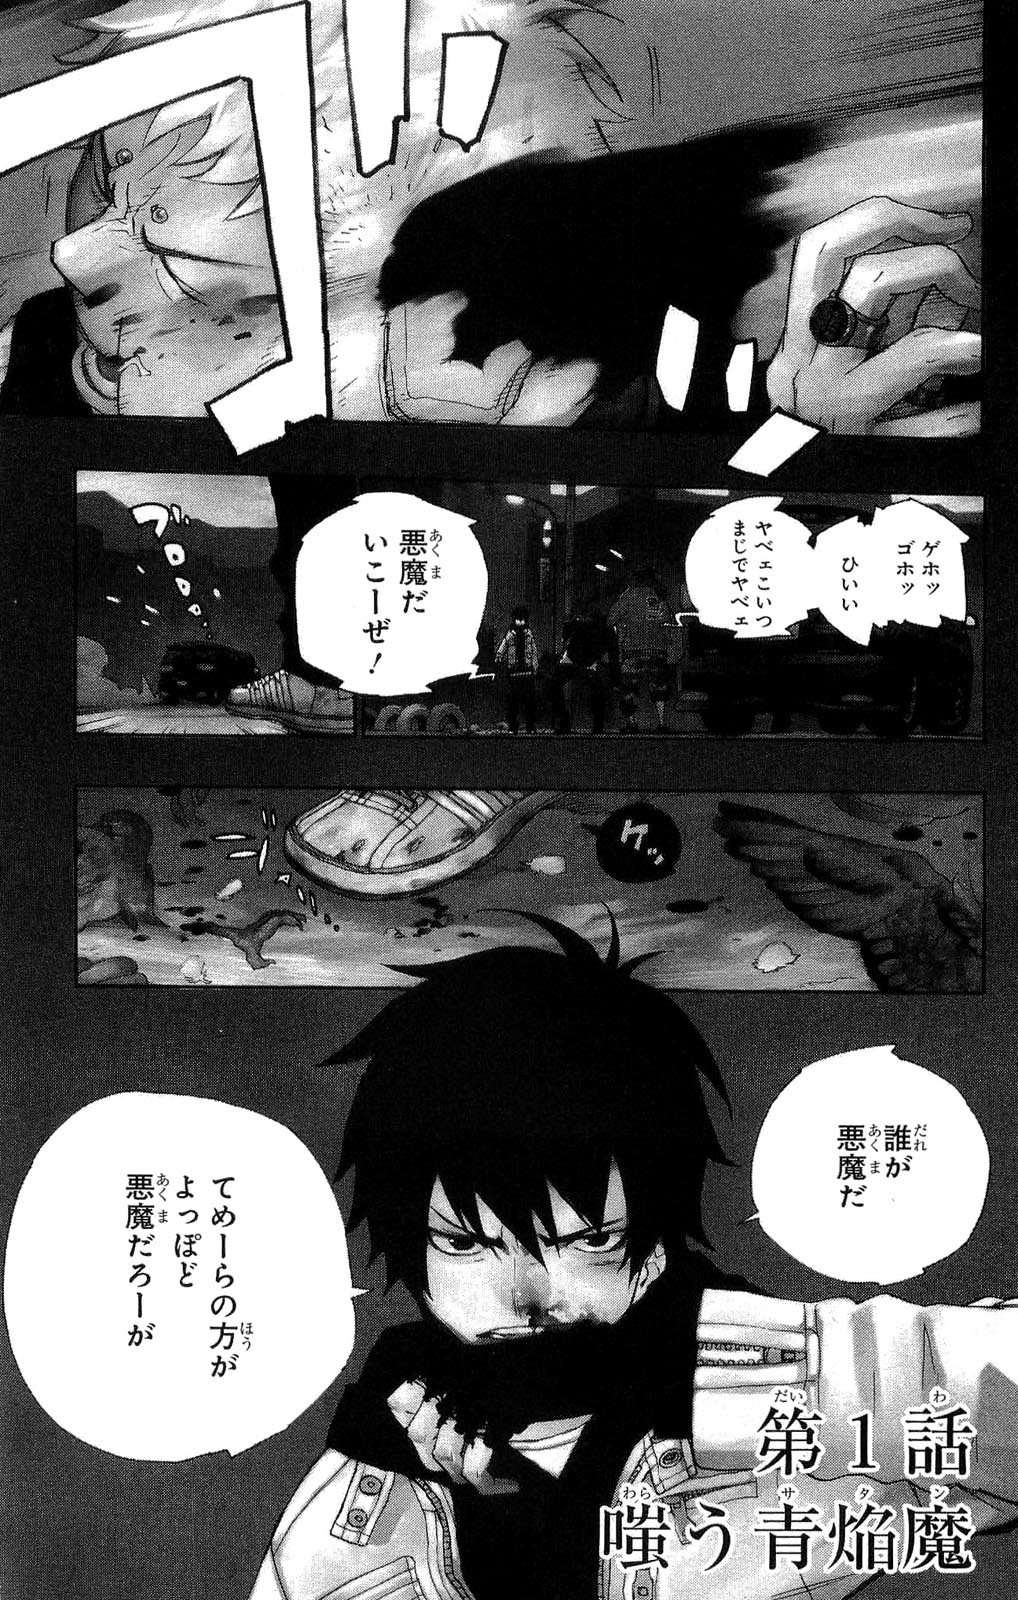 Ao no Exorcist - Chapter 1 - Page 1